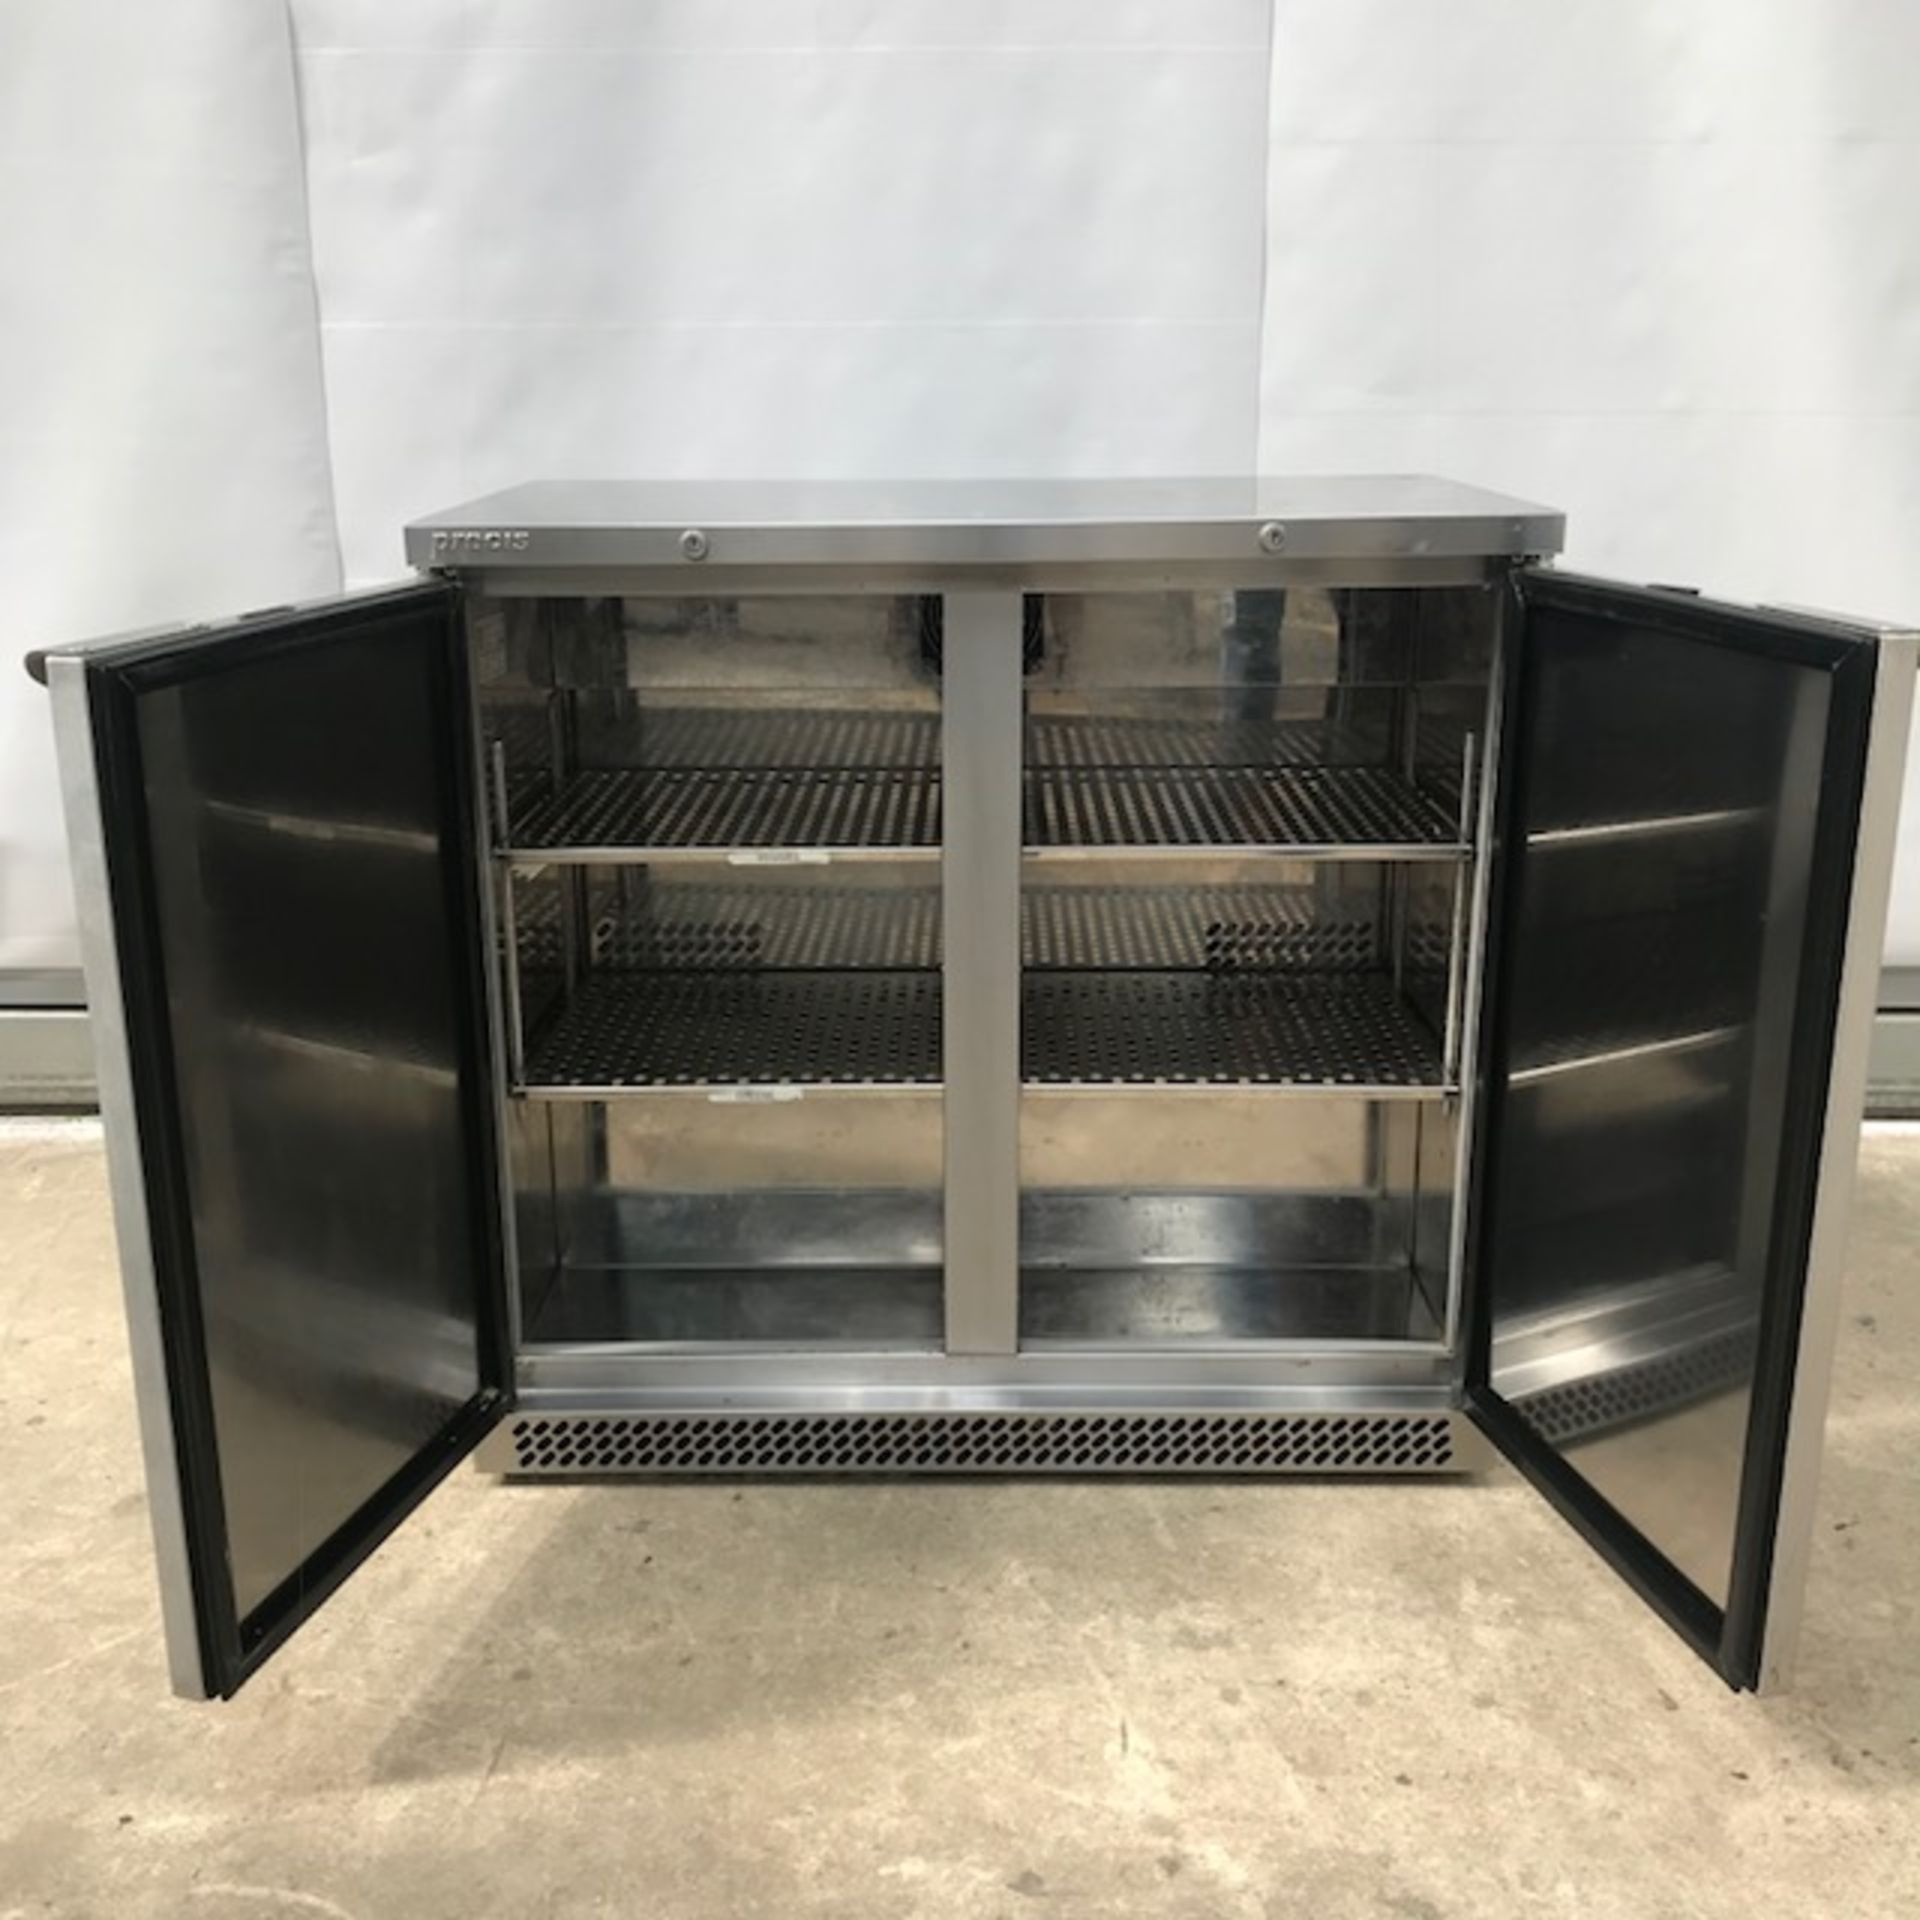 Precision BBS 900 2 door Back Bar chiller Precision's Back Bar Storage cabinets combine great